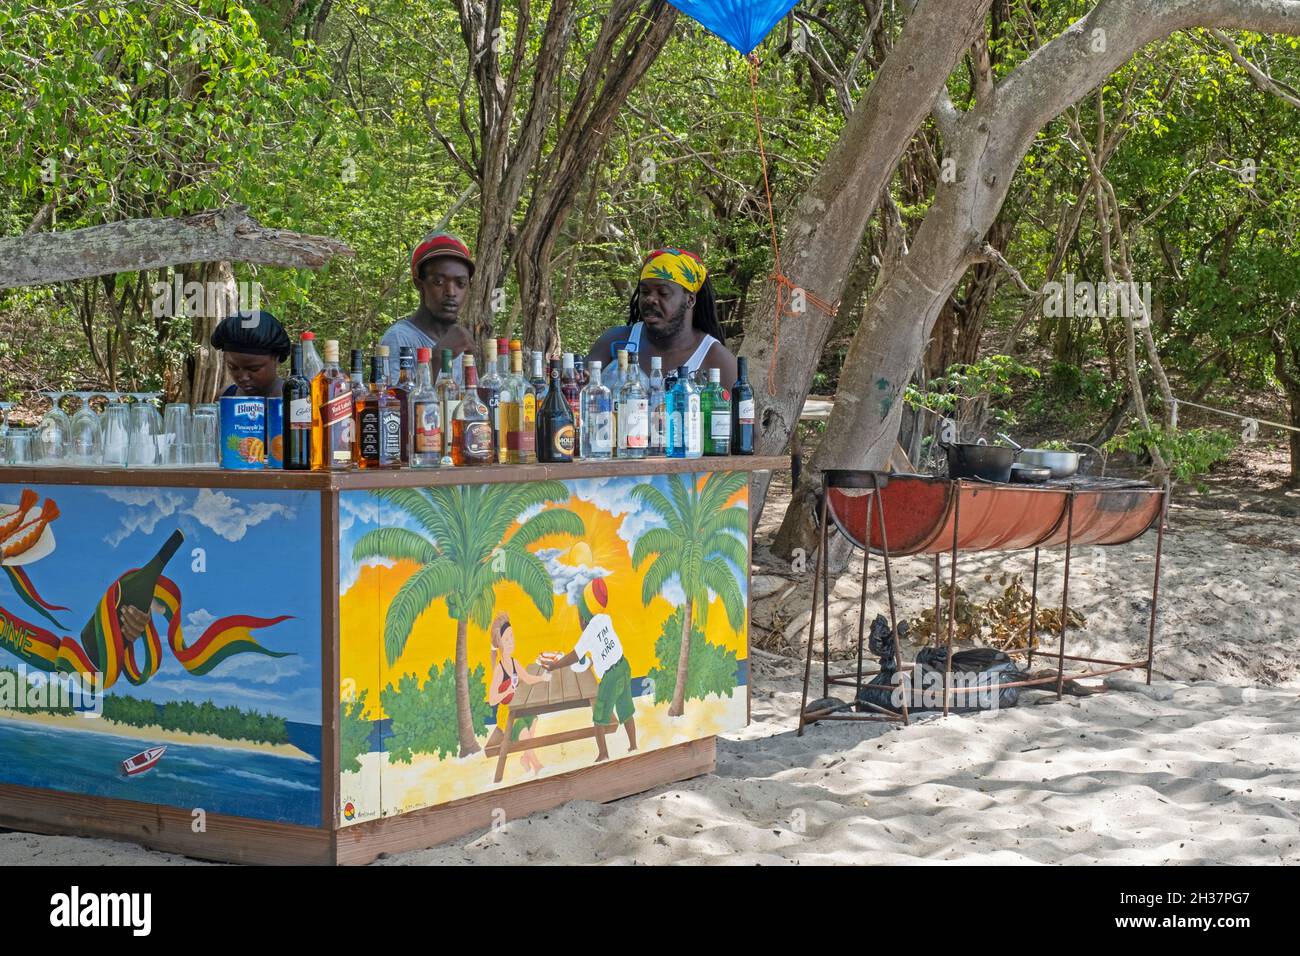 Beach bar serving alcoholic drinks and cocktails at Anse La Roche on Carriacou, island of the Grenadine Islands, Grenada in the Caribbean Sea Stock Photo